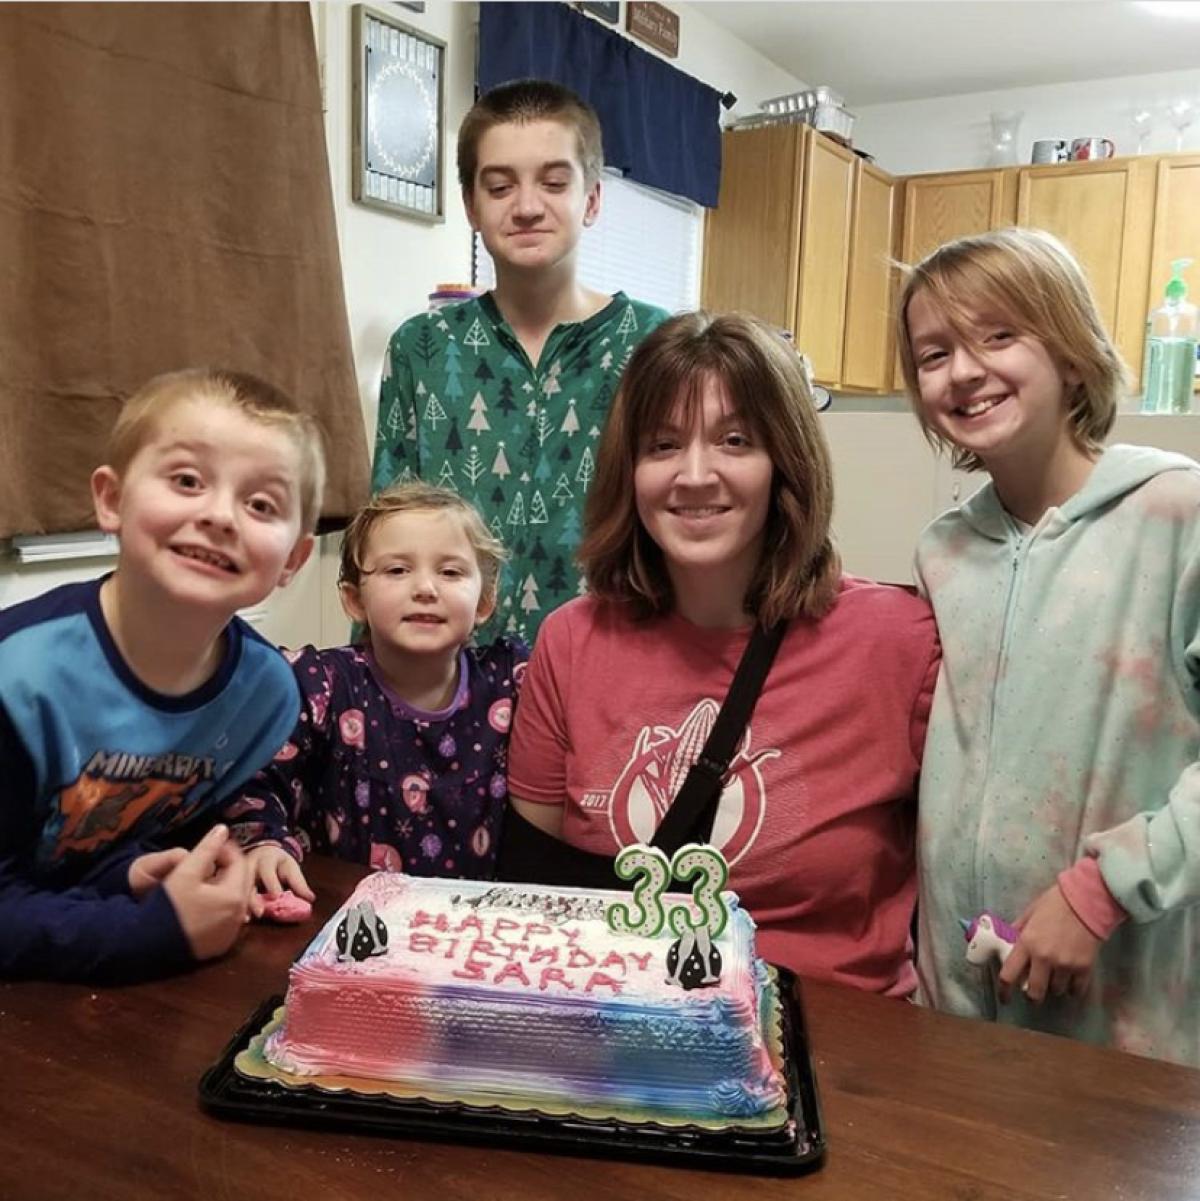 Sara Rosemeyer celebrates her birthday with her children (from left to right) Liam, Sadie, Noah and Layla.